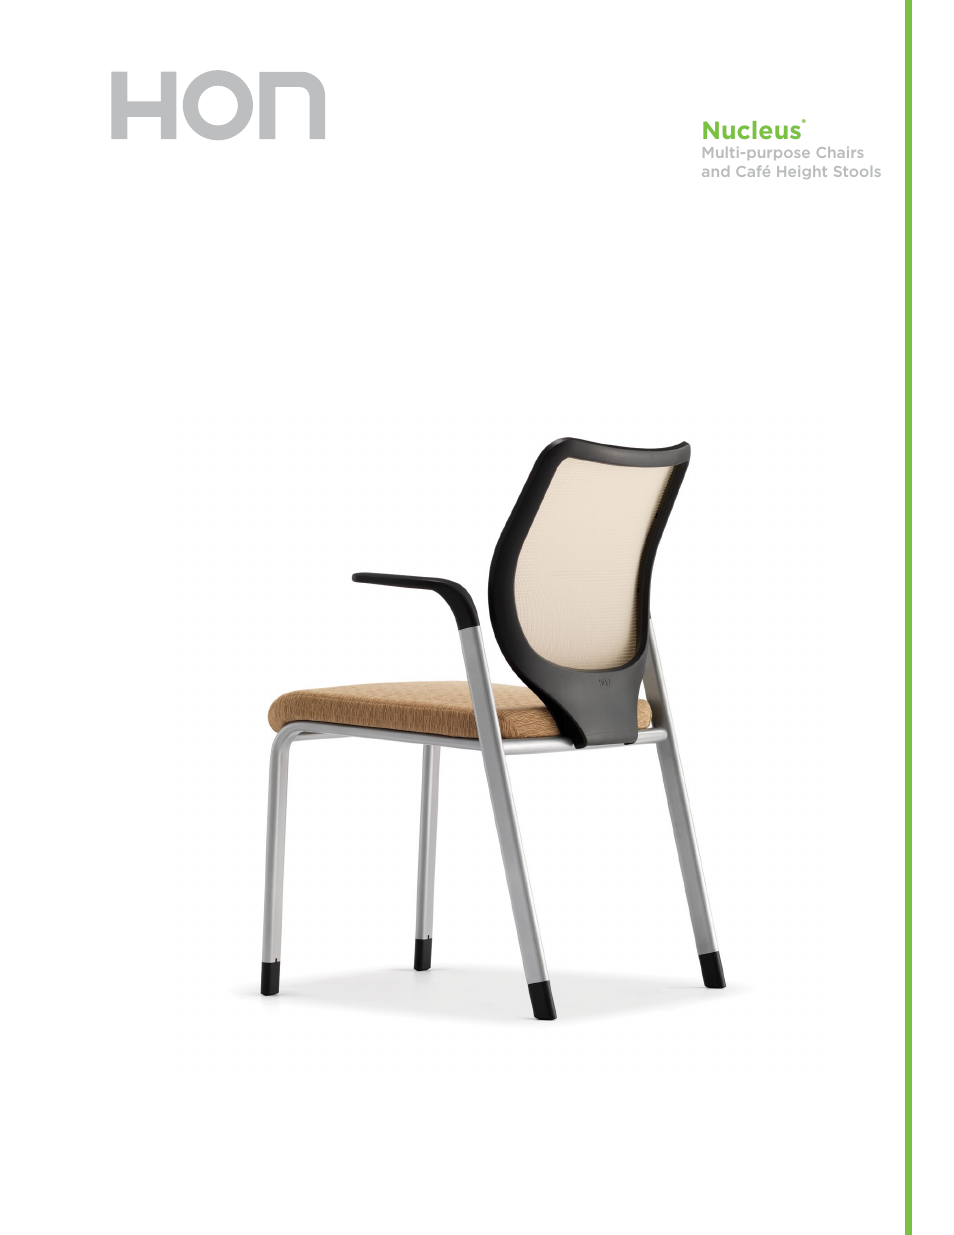 Nucleus Multi-purpose Chairs and Café Height Stools